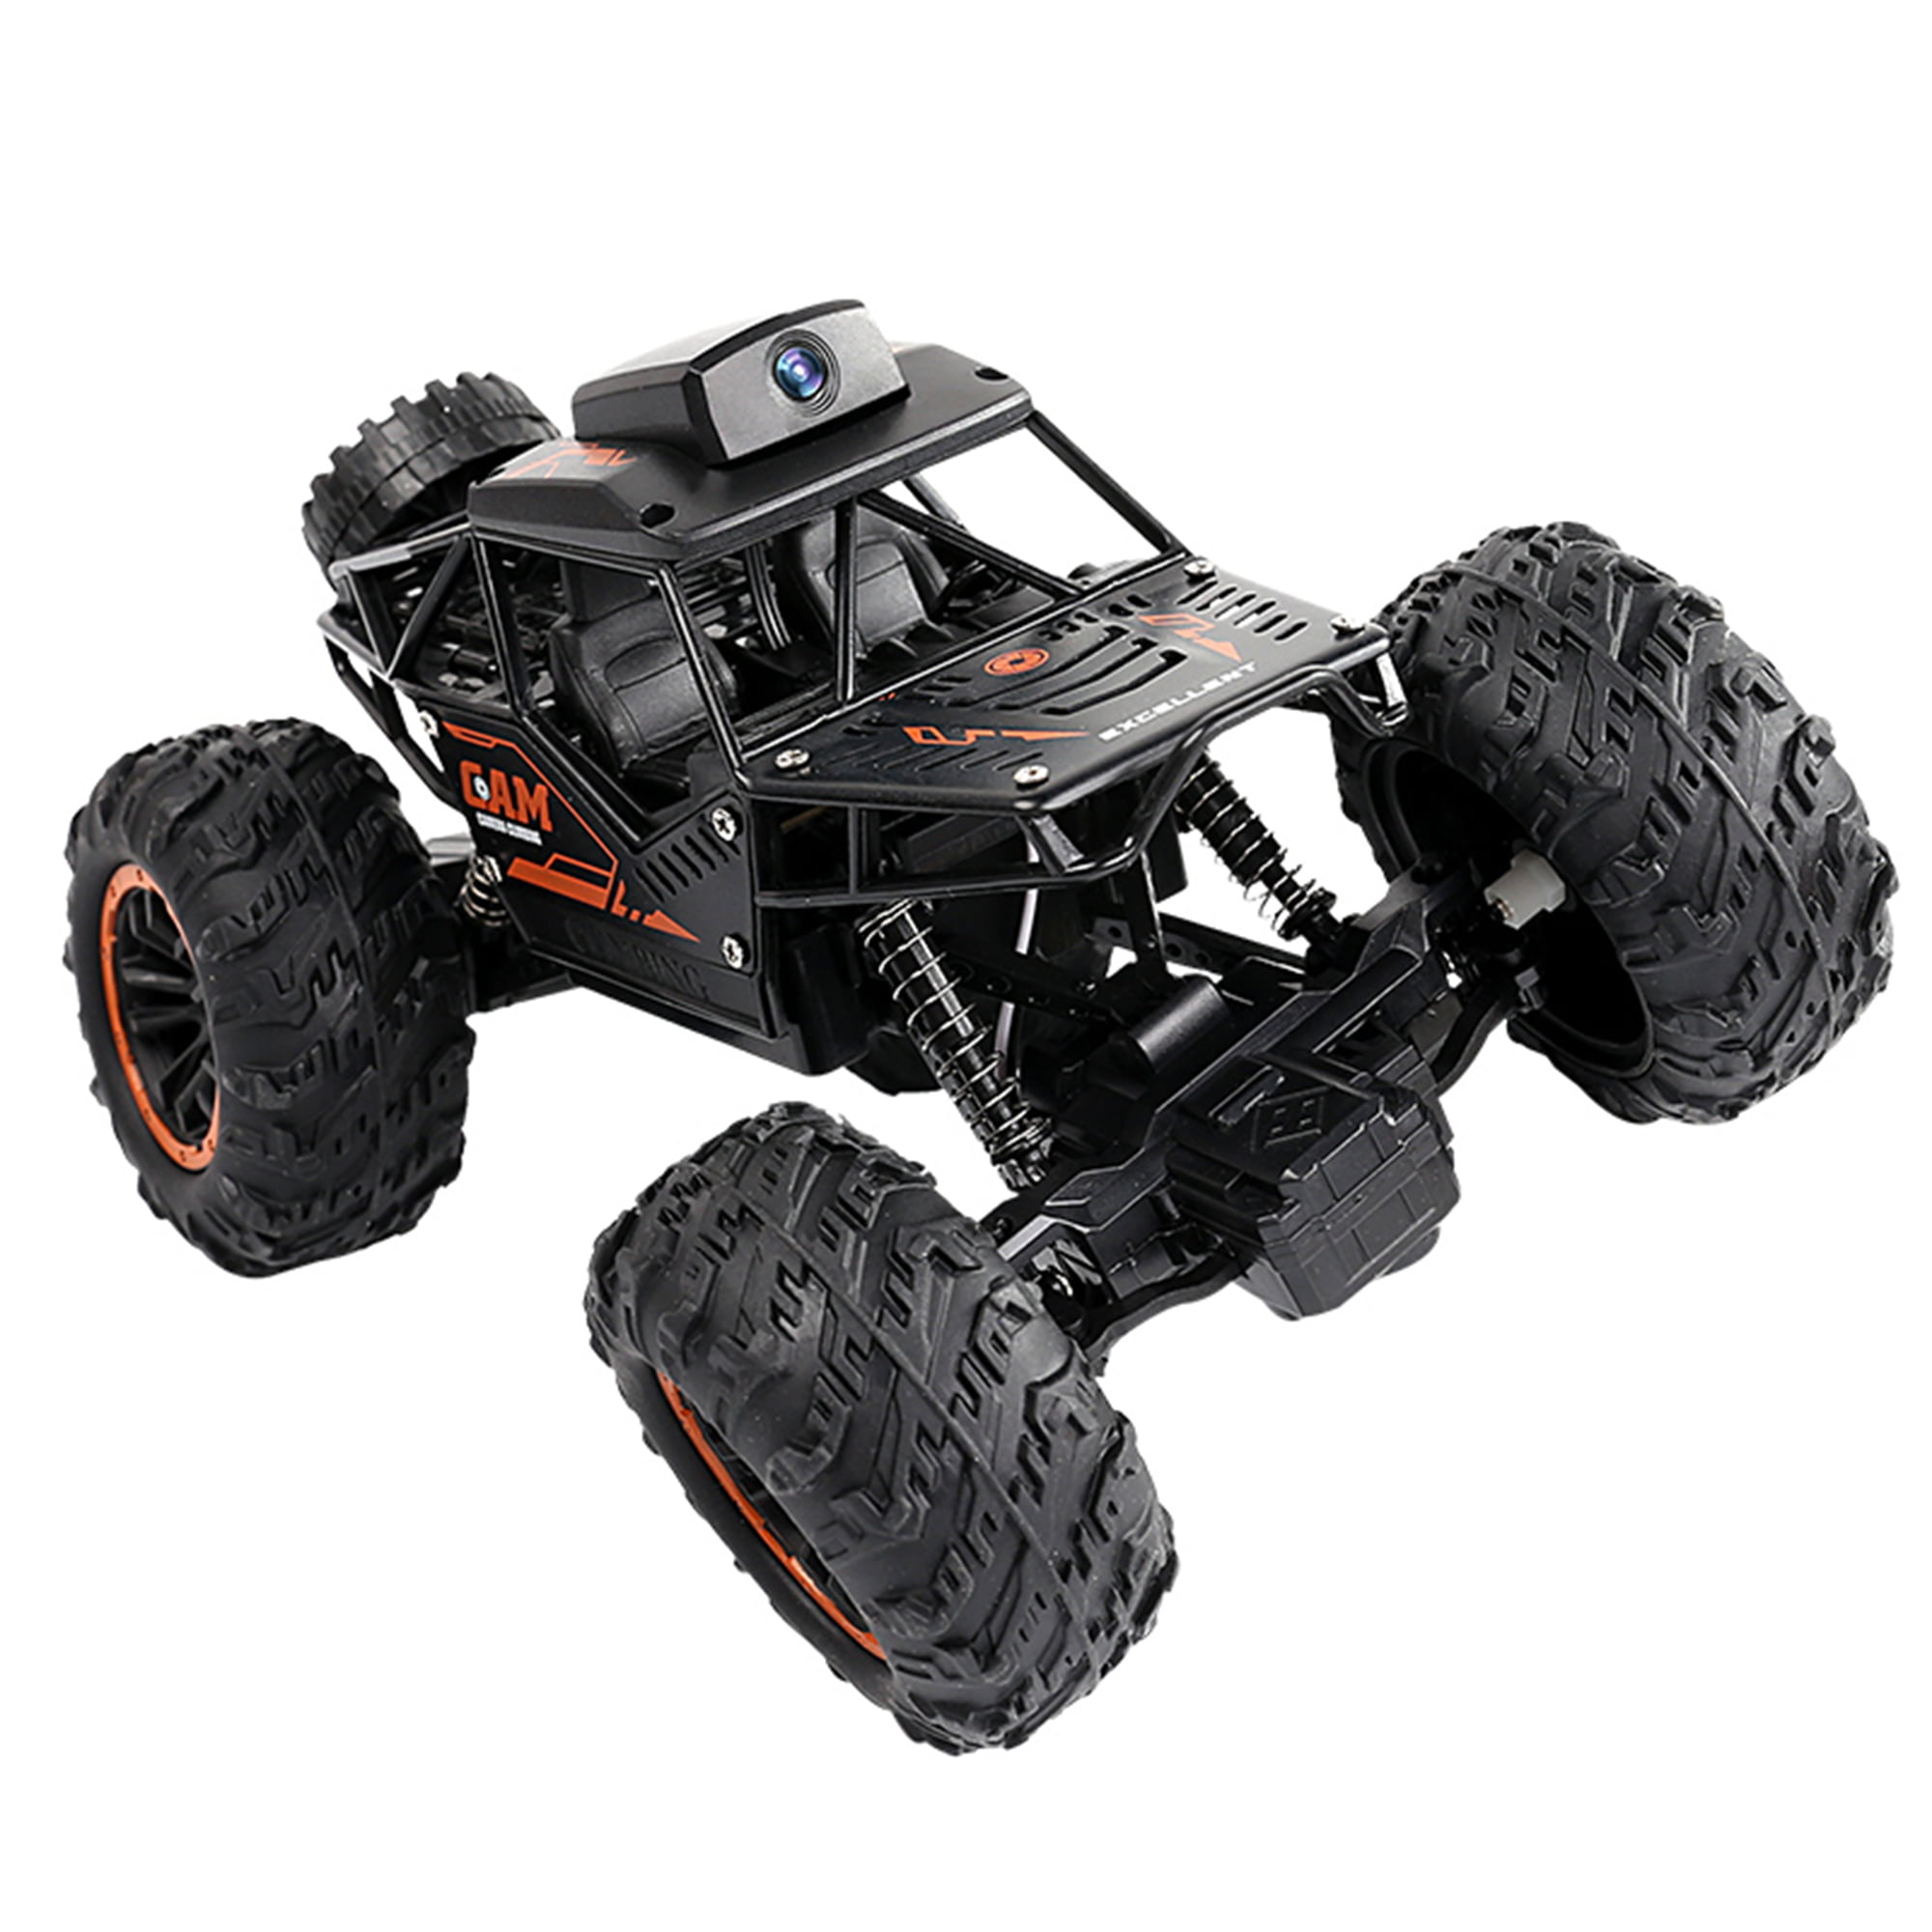 Wyze Car • Remote Control Car • Only 5,000 Made • SOLD OUT • FREE SHIPPING